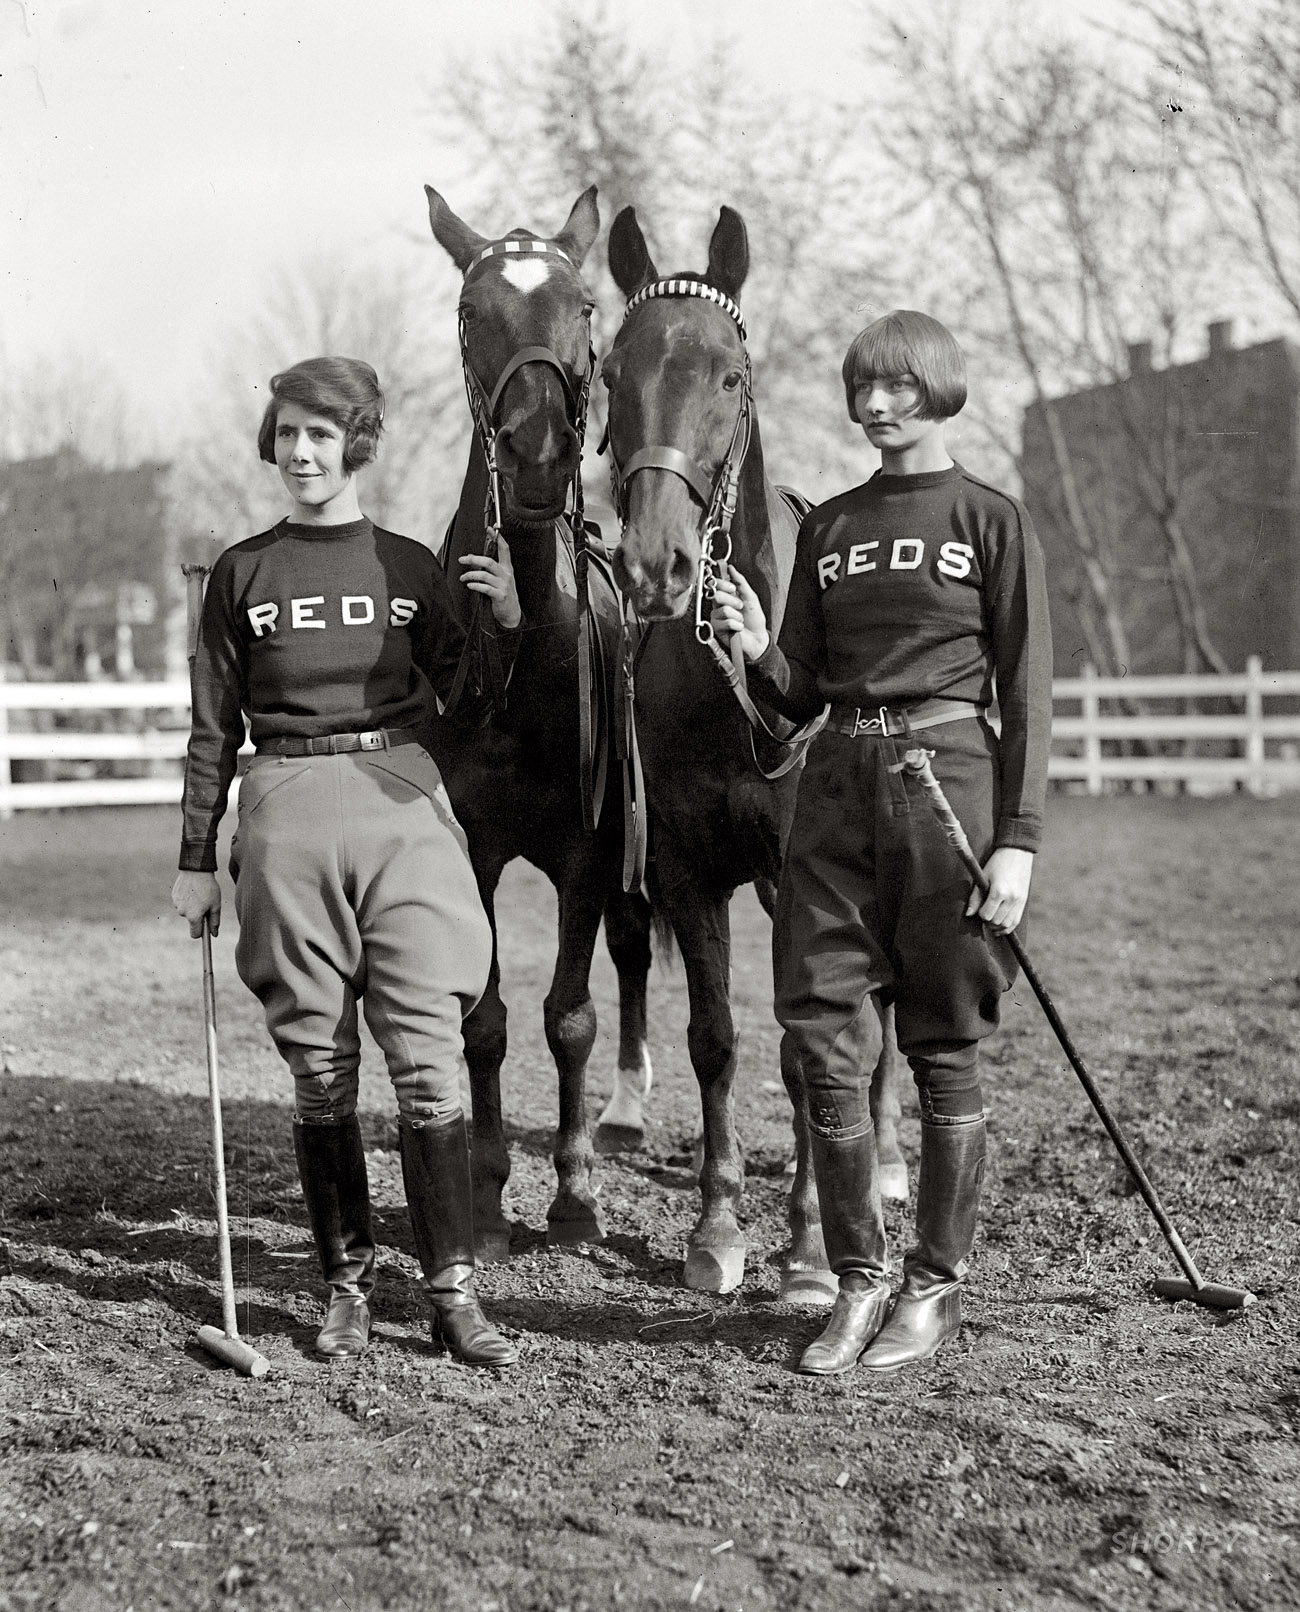 April 18, 1925. "Miss Louise Ireland & Miss Helen Marye." Last seen in the previous post on a tricycle with a big bow in her hair, 10 years later Helen has graduated to polo ponies and a bobbed 'do. National Photo Co. View full size.